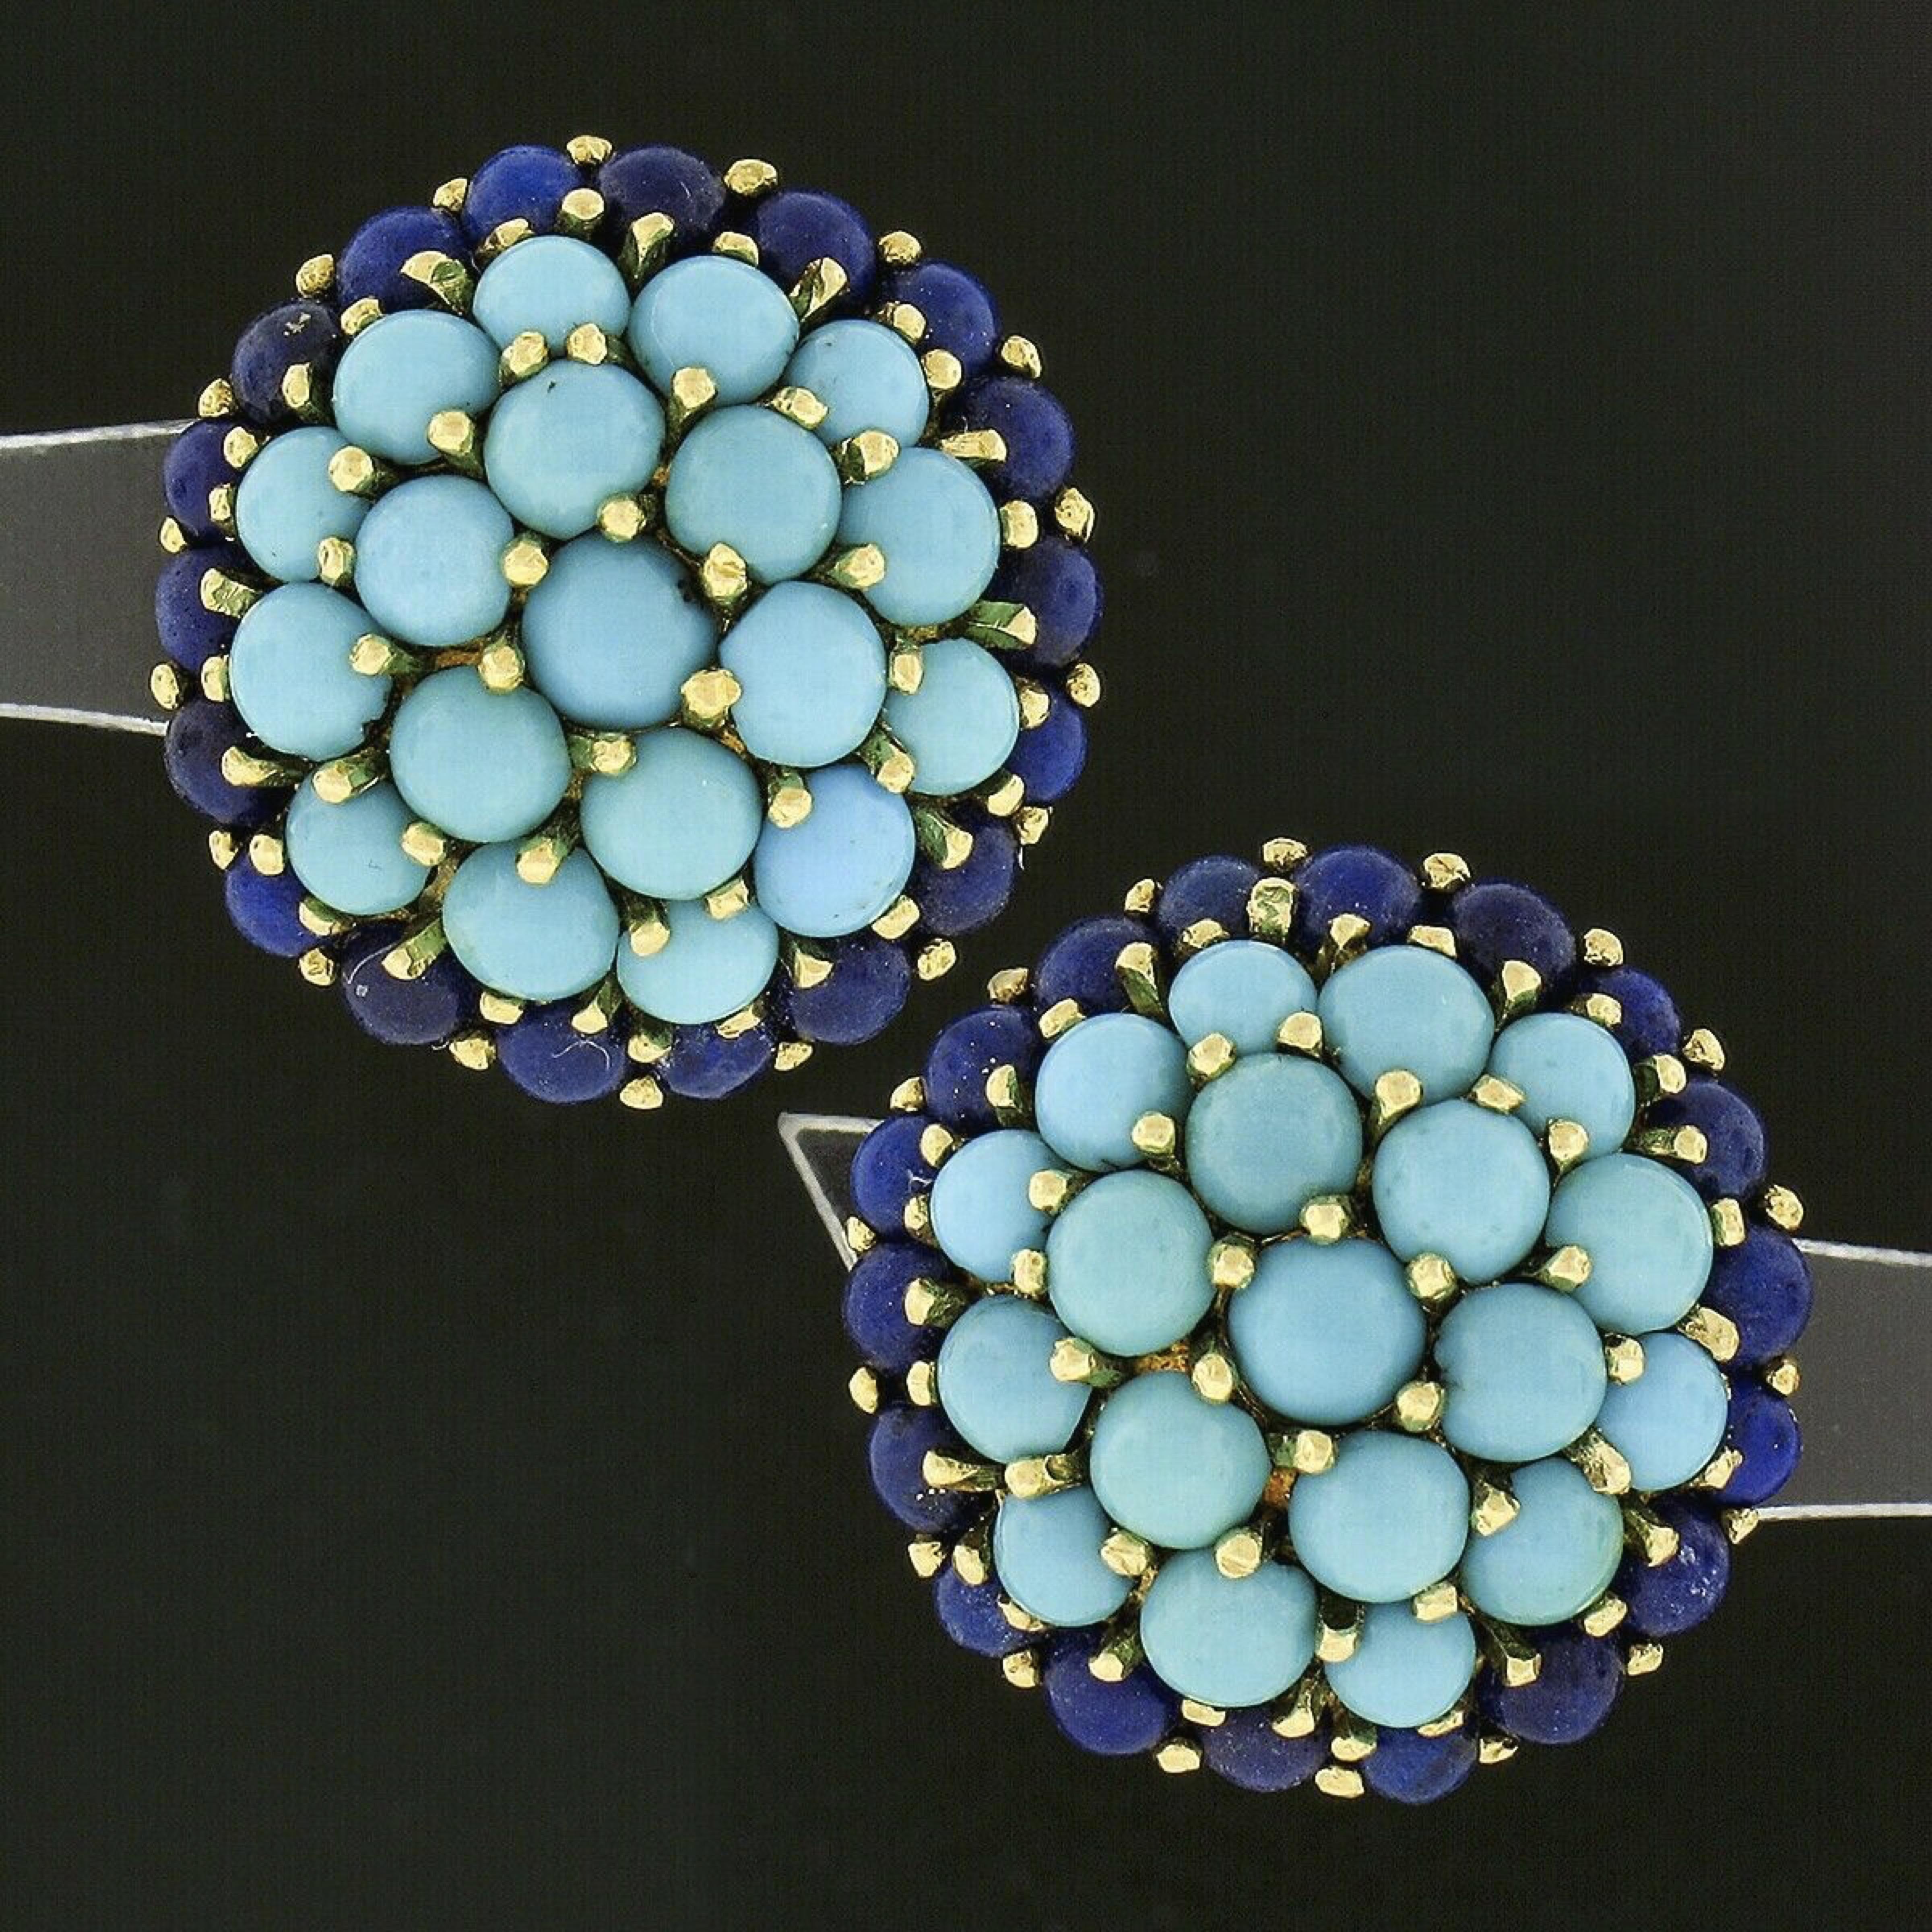 You are looking at a gorgeous vintage pair of natural turquoise and lapis cluster earrings crafted in solid 18k yellow gold. The cluster of round cabochon turquoise stones structure the slightly domed center of each earring, which is then surrounded